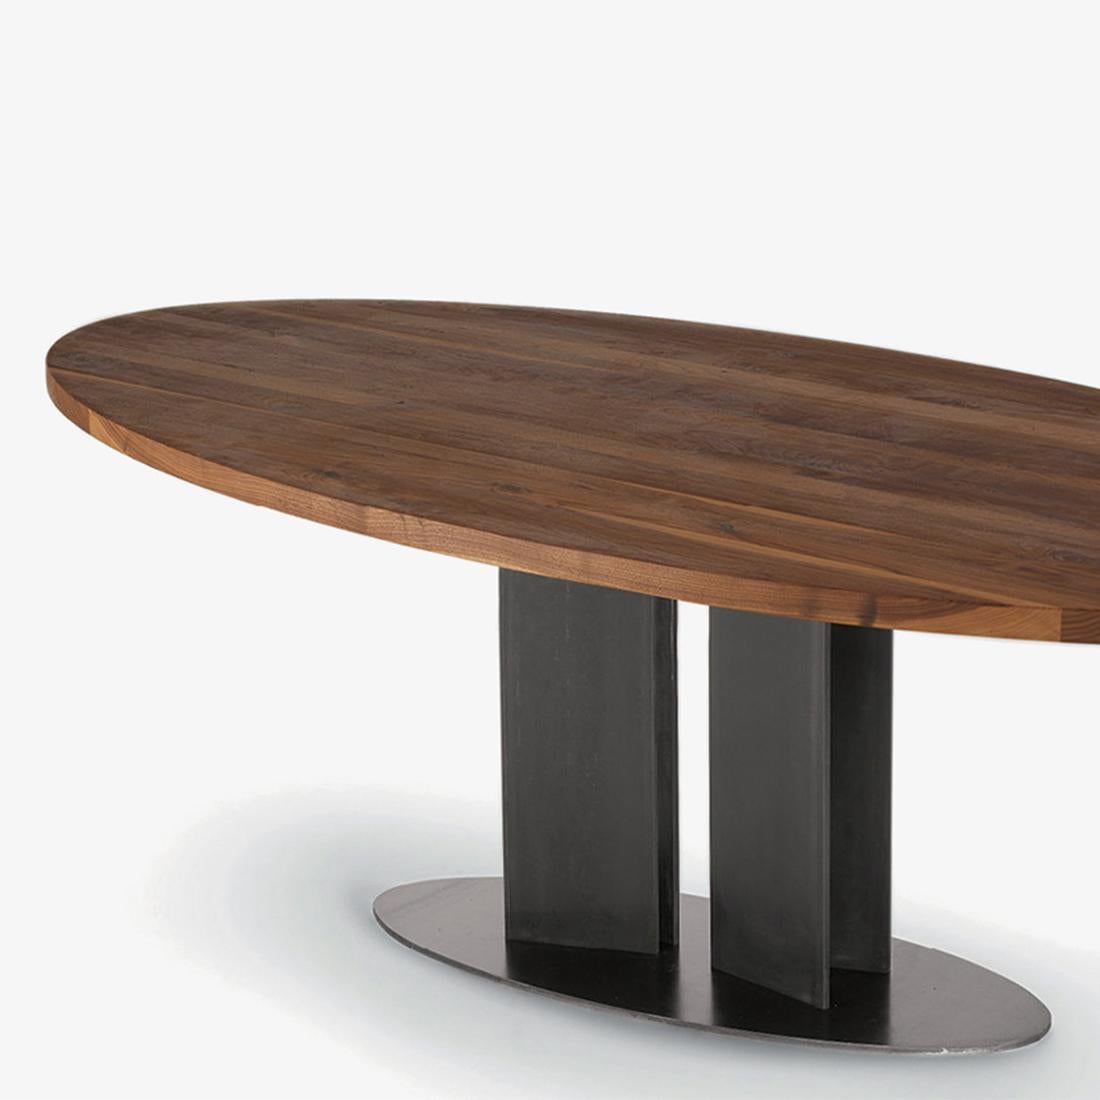 Dining table oval walnut with solid walnut top
and with iron base in lacquered matt finish.
Available in:
L 200 x D 100 x H 75cm, price: 9900,00€
L 220 x D 100 x H 75cm, price: 10500,00€
L 240 x D 100 x H 75cm, price: 11500,00€
L 260 x D 100 x H